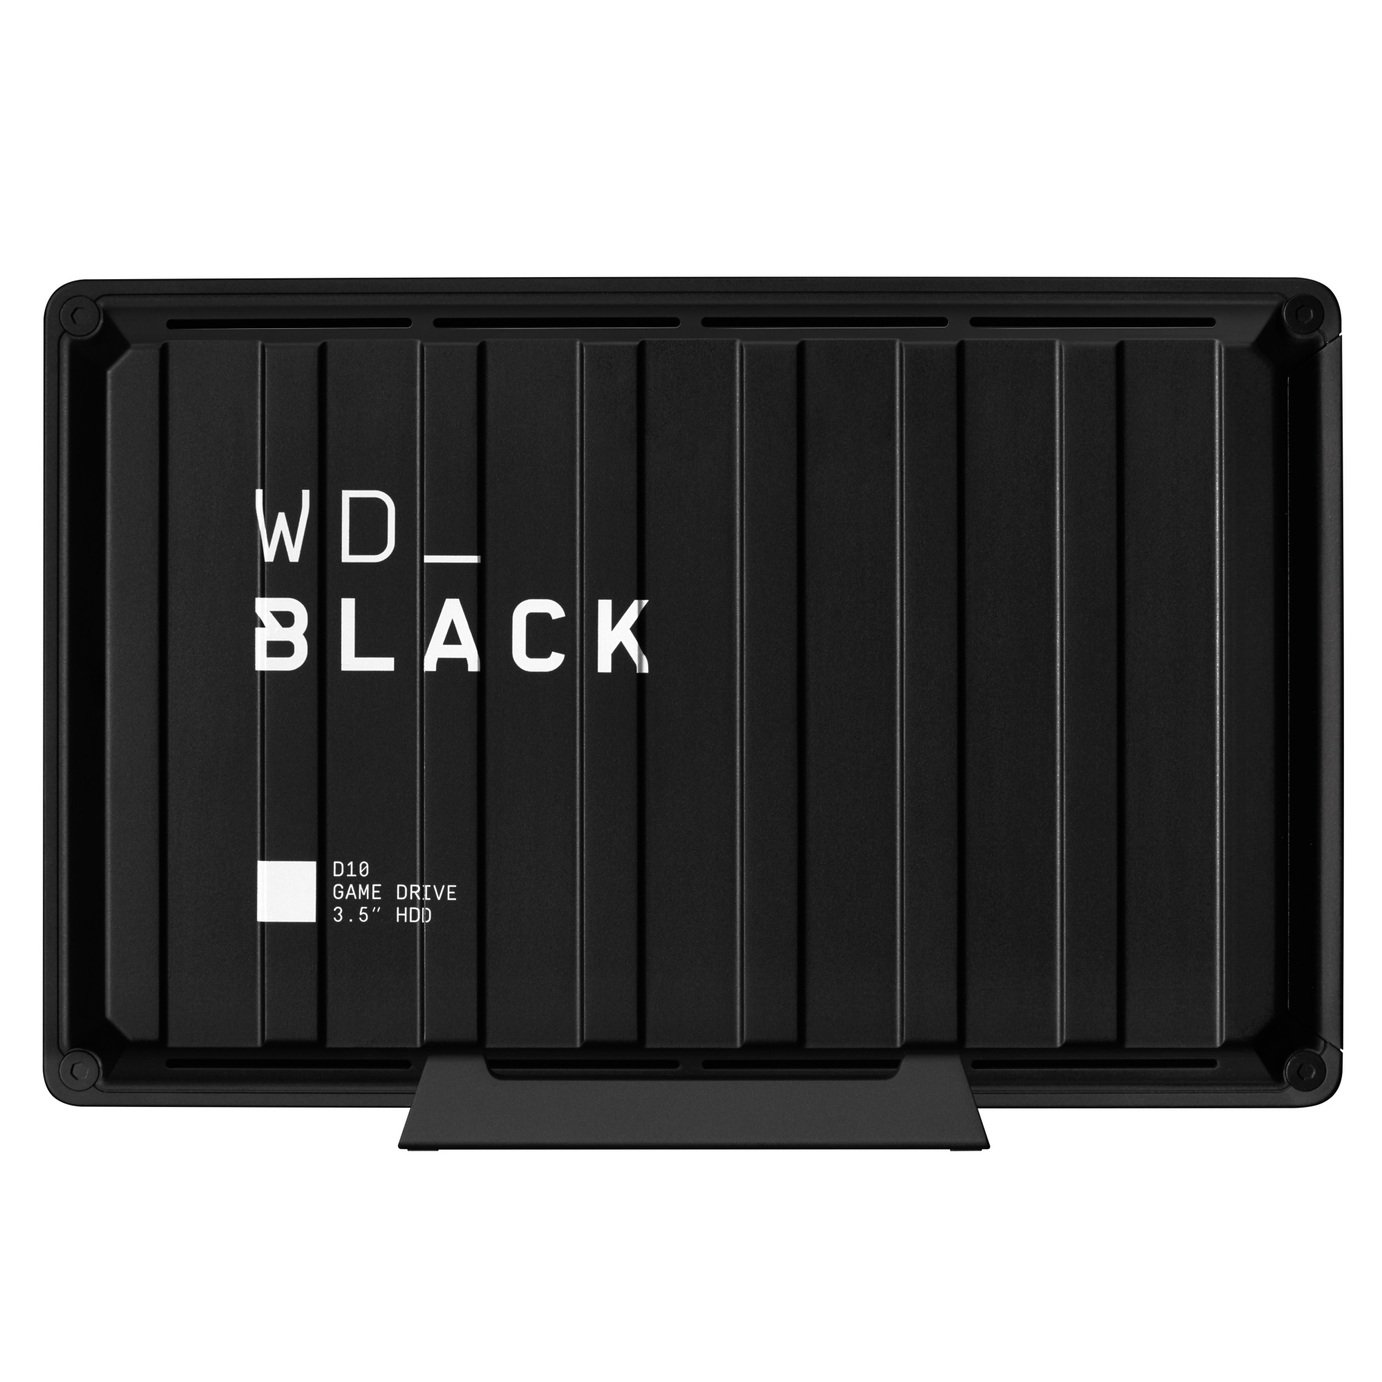 WD Black 8TB D10 Gaming Drive for Console or PC Review